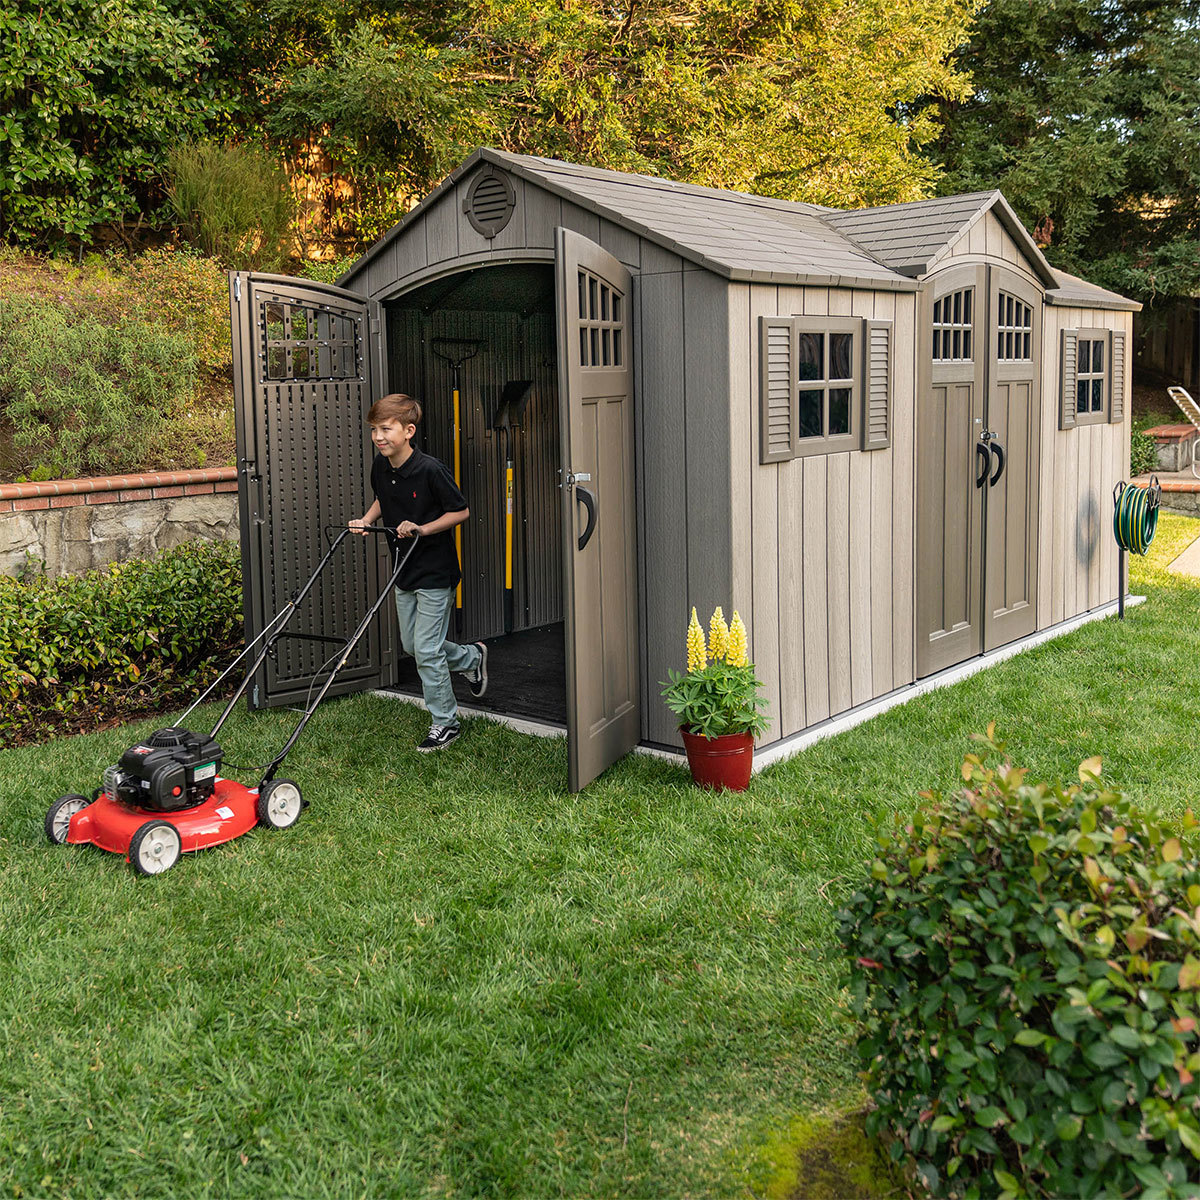 Boy walking out of lifetime Storage shed with a lawnmower